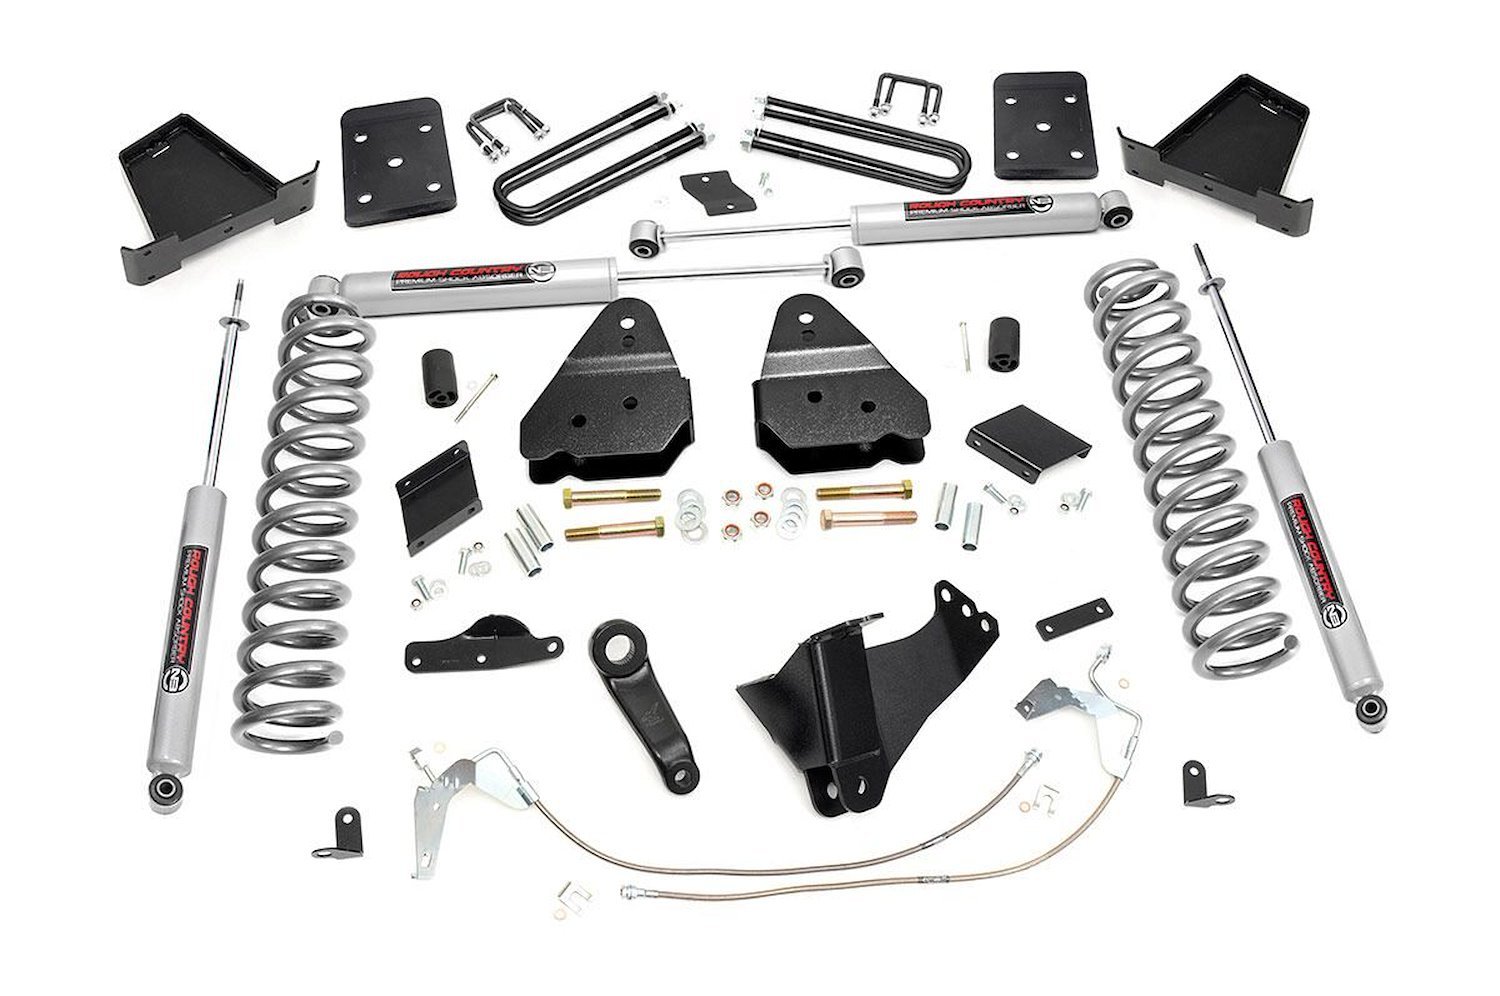 551.20 6 in. Lift Kit, Diesel, No OVLD, Ford Super Duty 4WD (15-16)